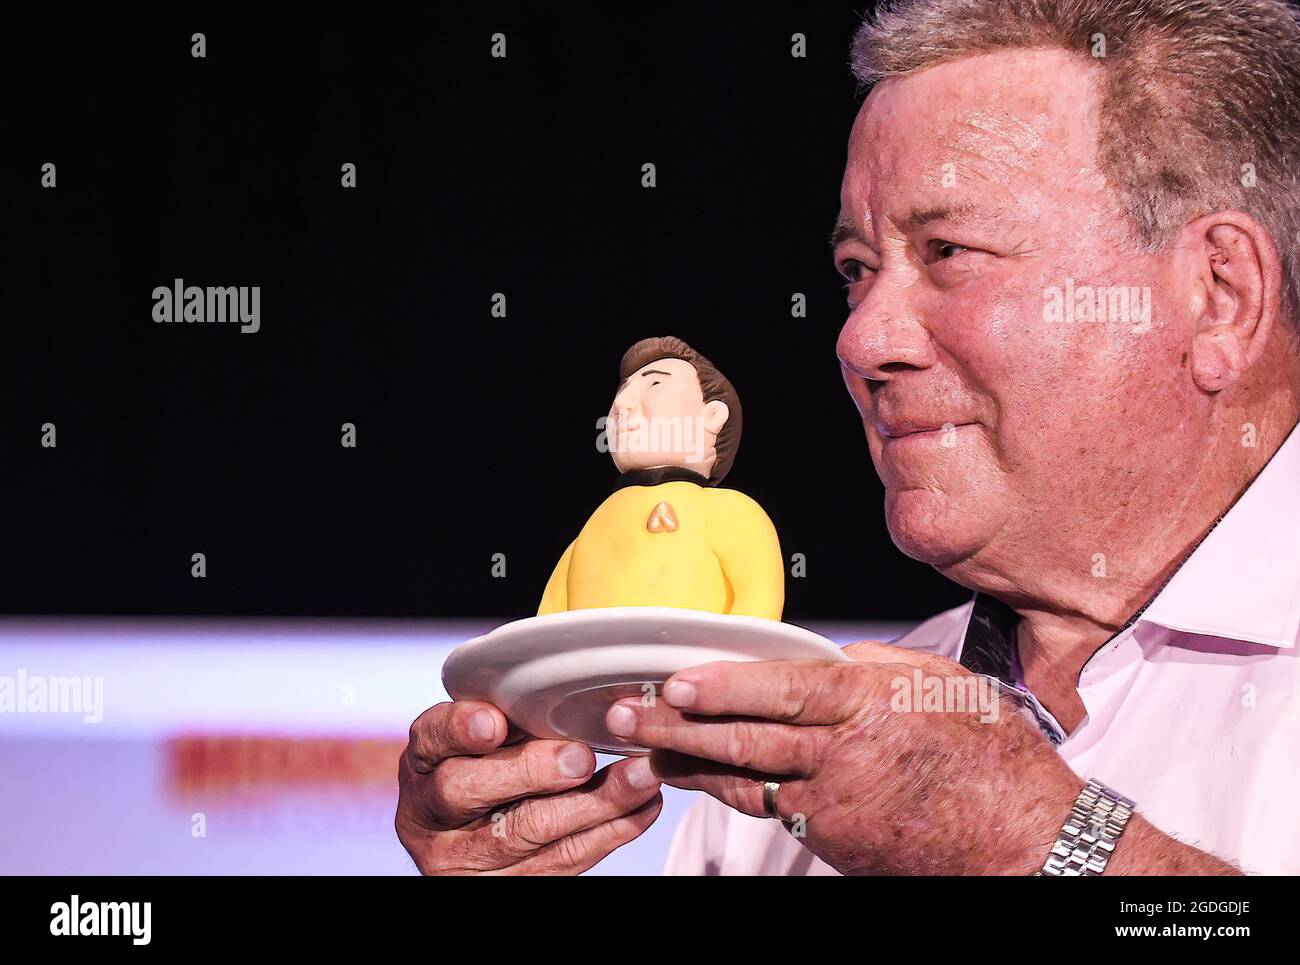 Actor William Shatner, best known for his portrayal of Captain James T. Kirk of the USS Enterprise in the Star Trek television series and movies, holds a portion of a birthday cake presented to him at a Q&A session on the opening day of MEGACON at the Orange County Convention Center. The 4-day convention caters to the comic book, sci-fi, anime, fantasy, and gaming communities, and features celebrity appearances. Due to the current spike in COVID-19 cases in Florida, all attendees are required to wear face masks. Stock Photo